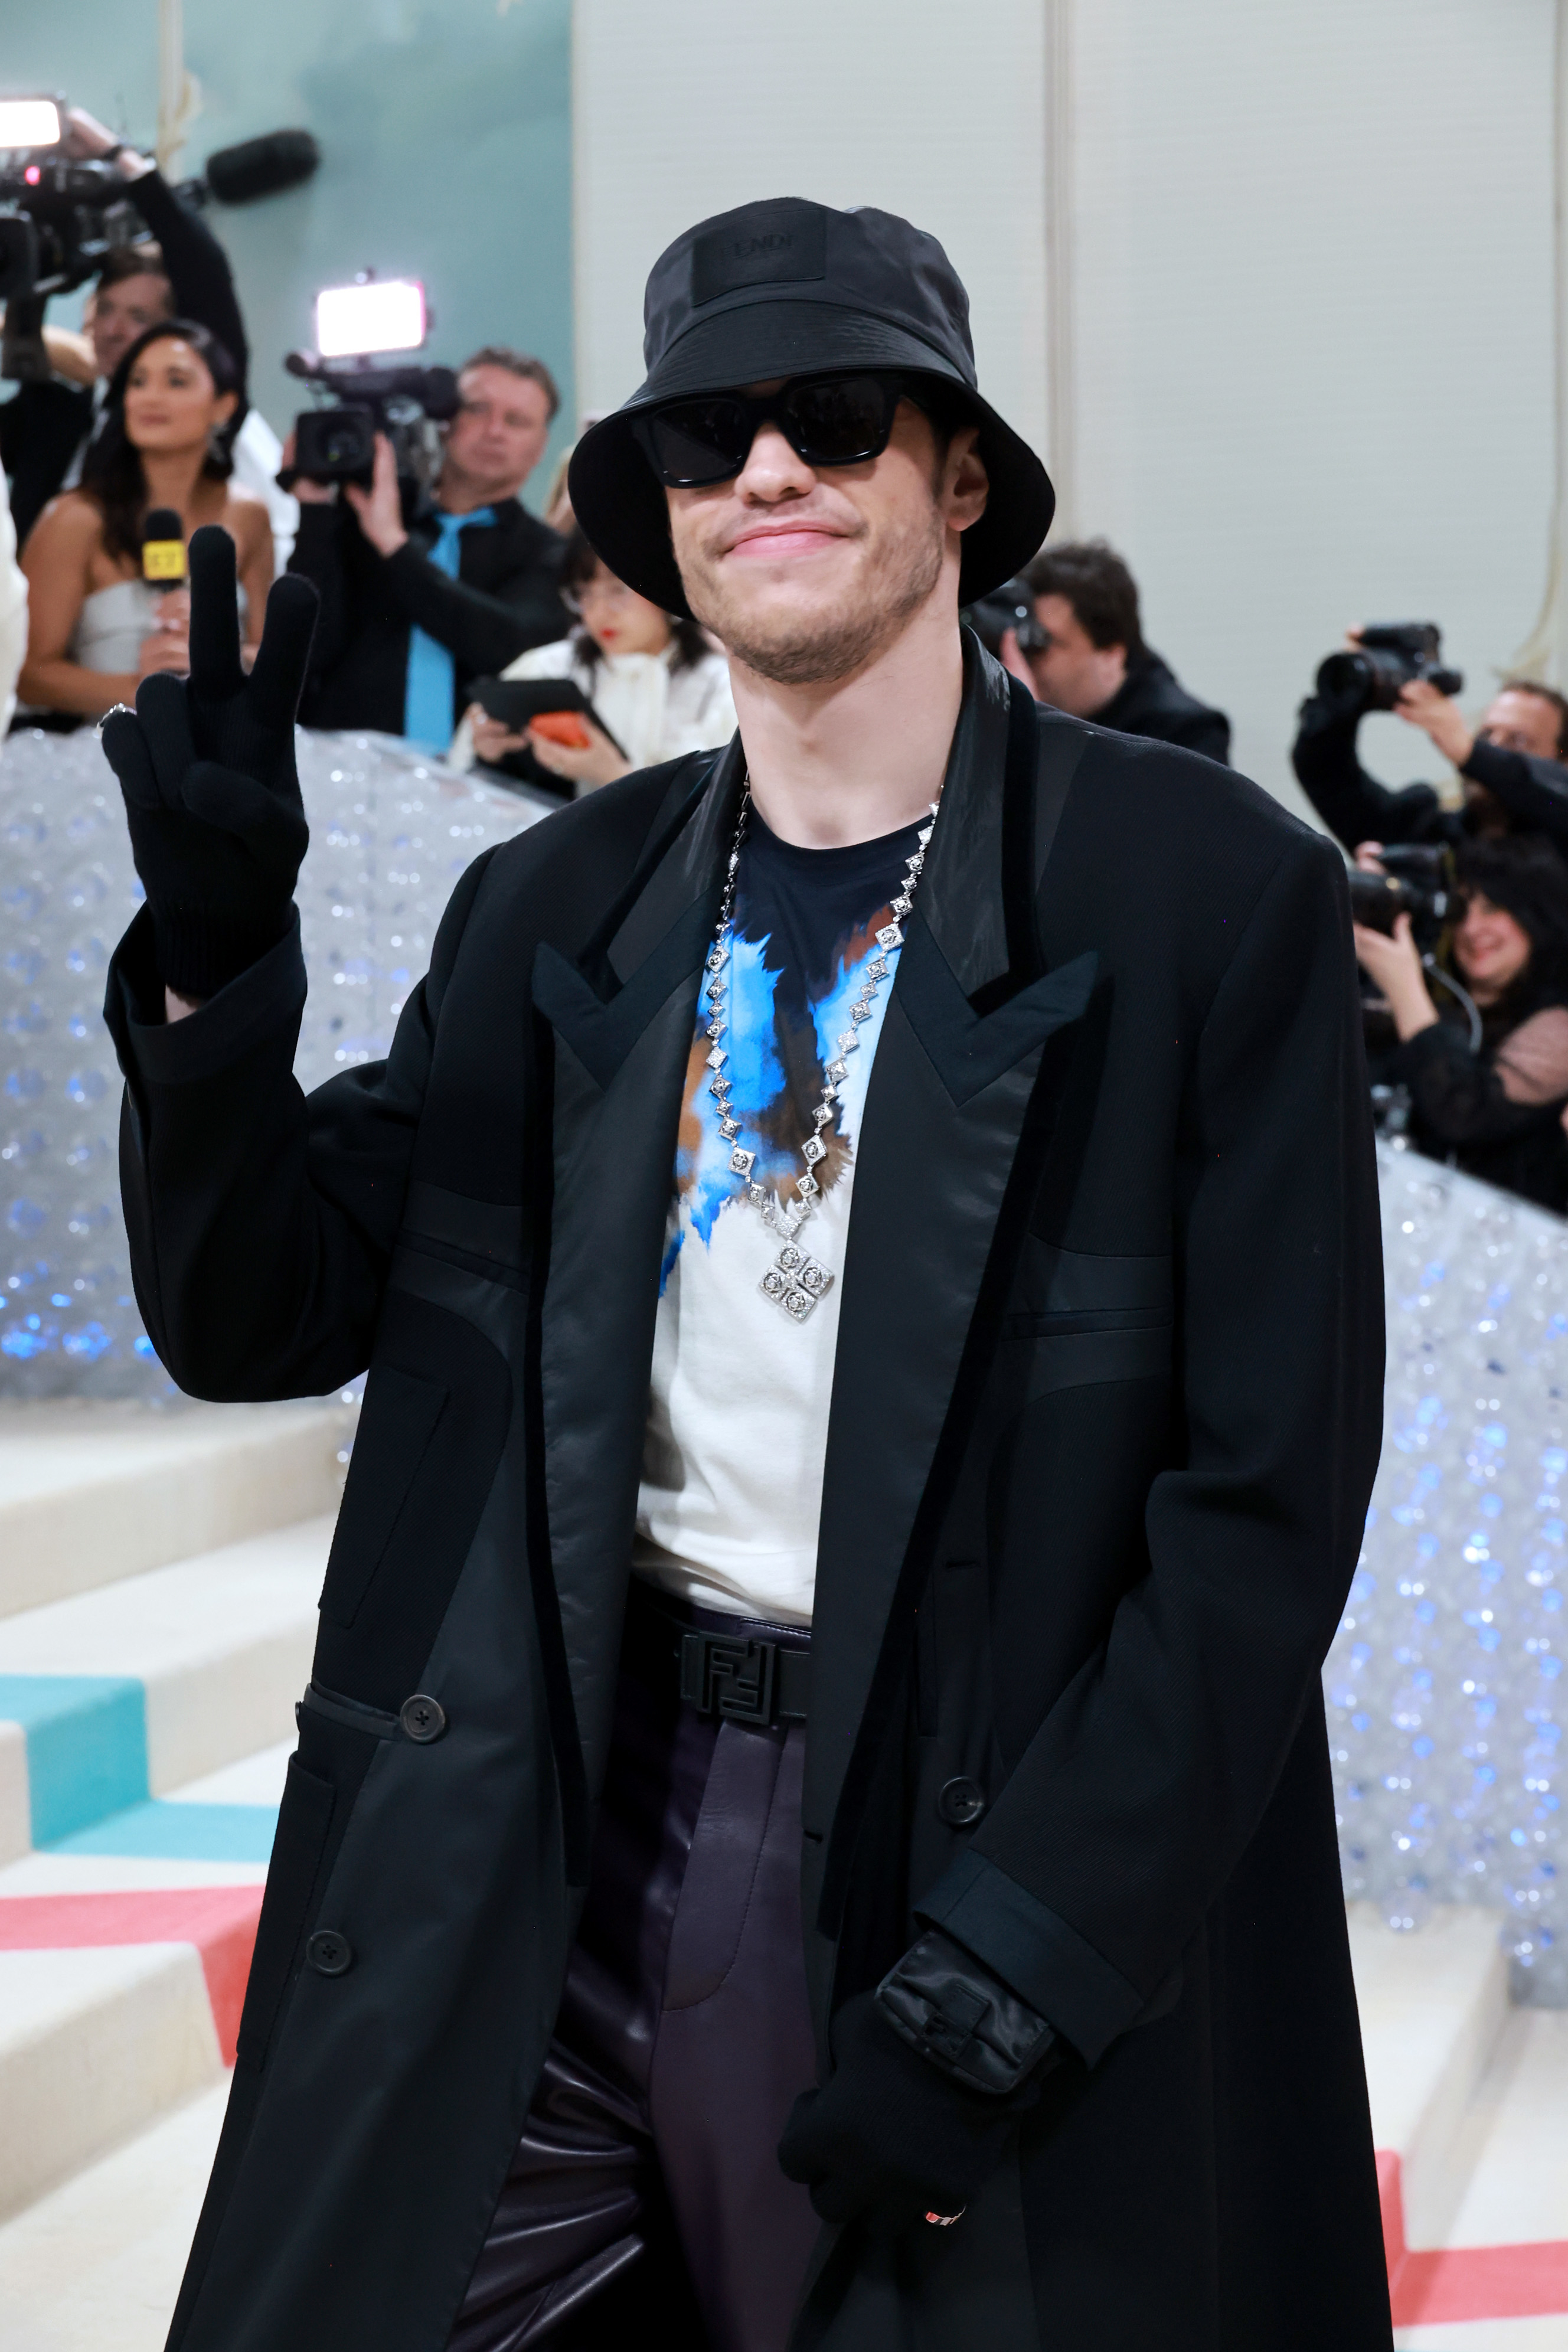 Close-up of Pete at a media event in a long coat, gloves, sunglasses, and hat